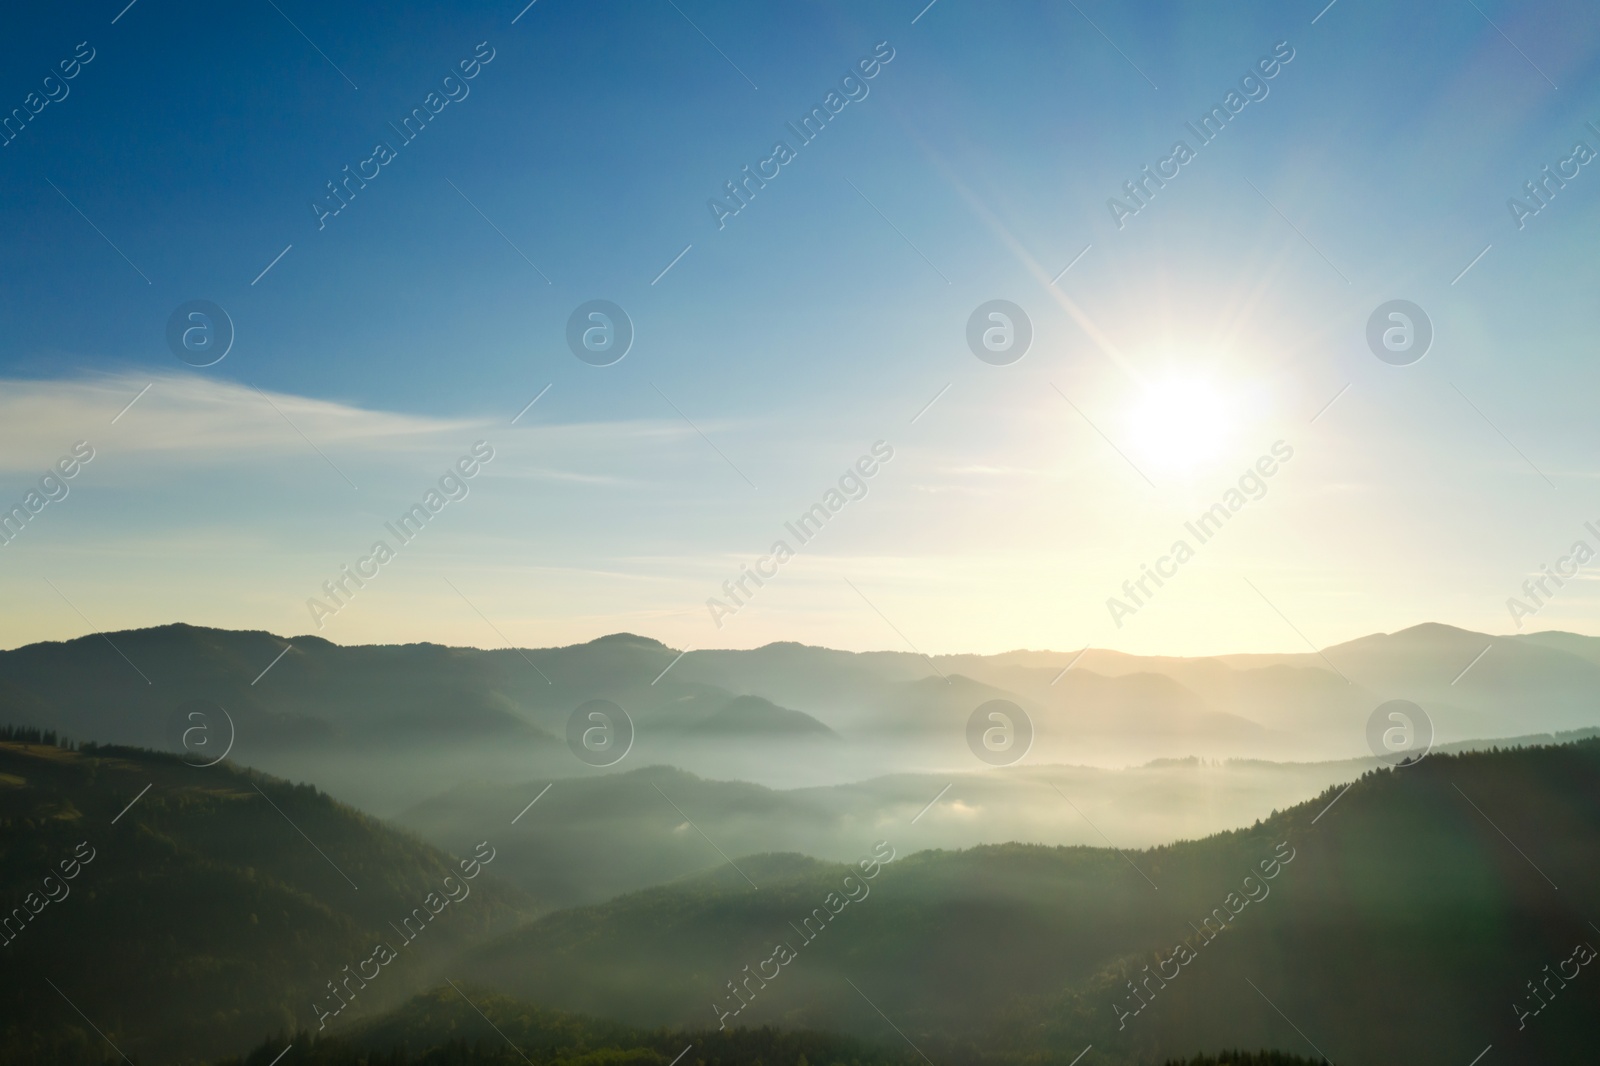 Image of Sun shining over forest in misty mountains. Drone photography